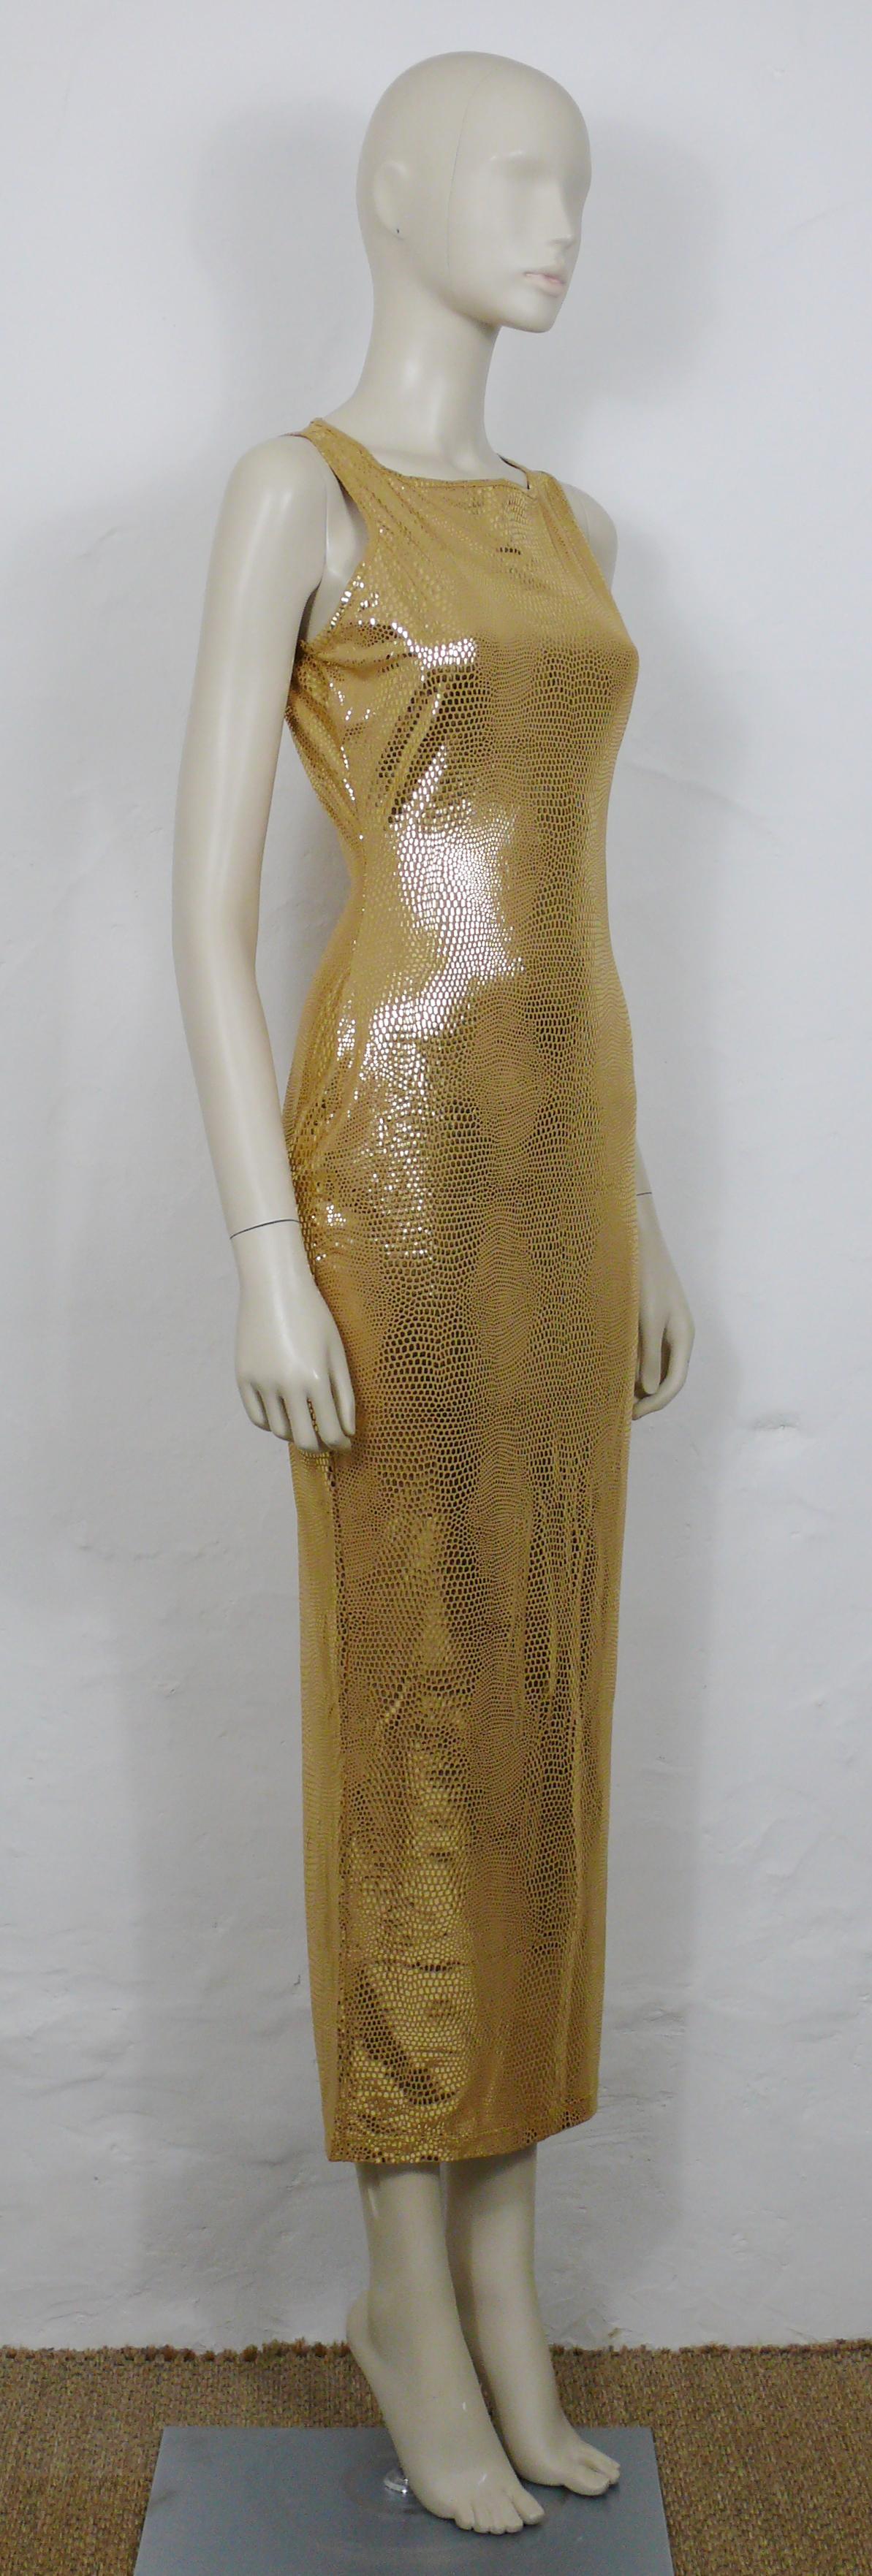 THIERRY MUGLER vintage gold reptile skin like body-conscious sleeveless dress from the 1998 Autumn/Winter Collection.

This dress features :
- Stretchy fabric printed in spectacular glittering gold reptile skin pattern. 
- Square neckline.
- Back